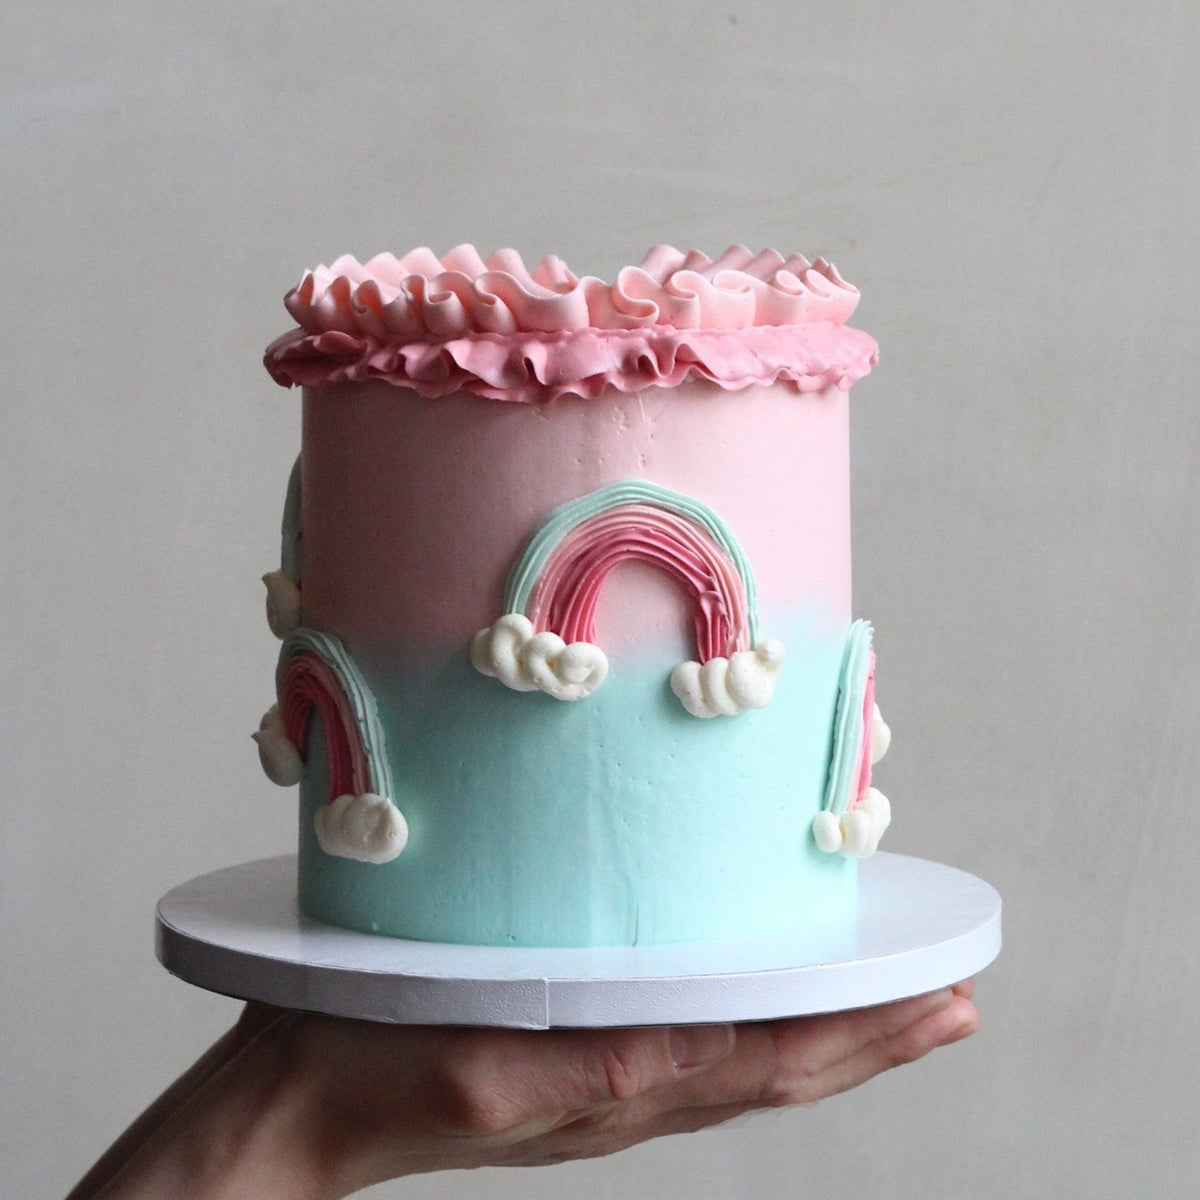 Our Rainbow Cake with pink &amp; mint icing, 3D rainbows and creamy ruffles!